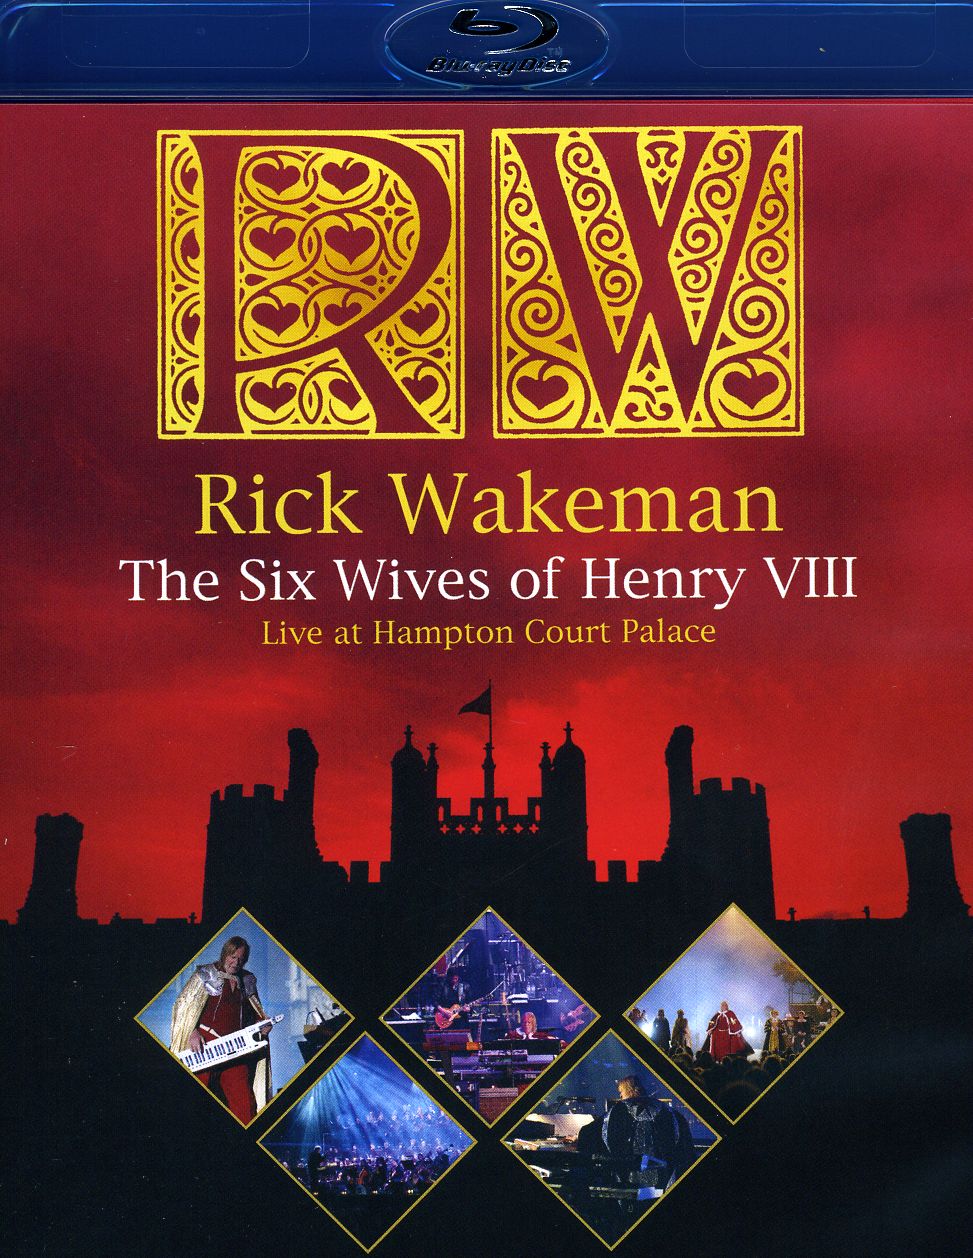 SIX WIVES OF HENRY VIII: LIVE AT HAMPTON COURT